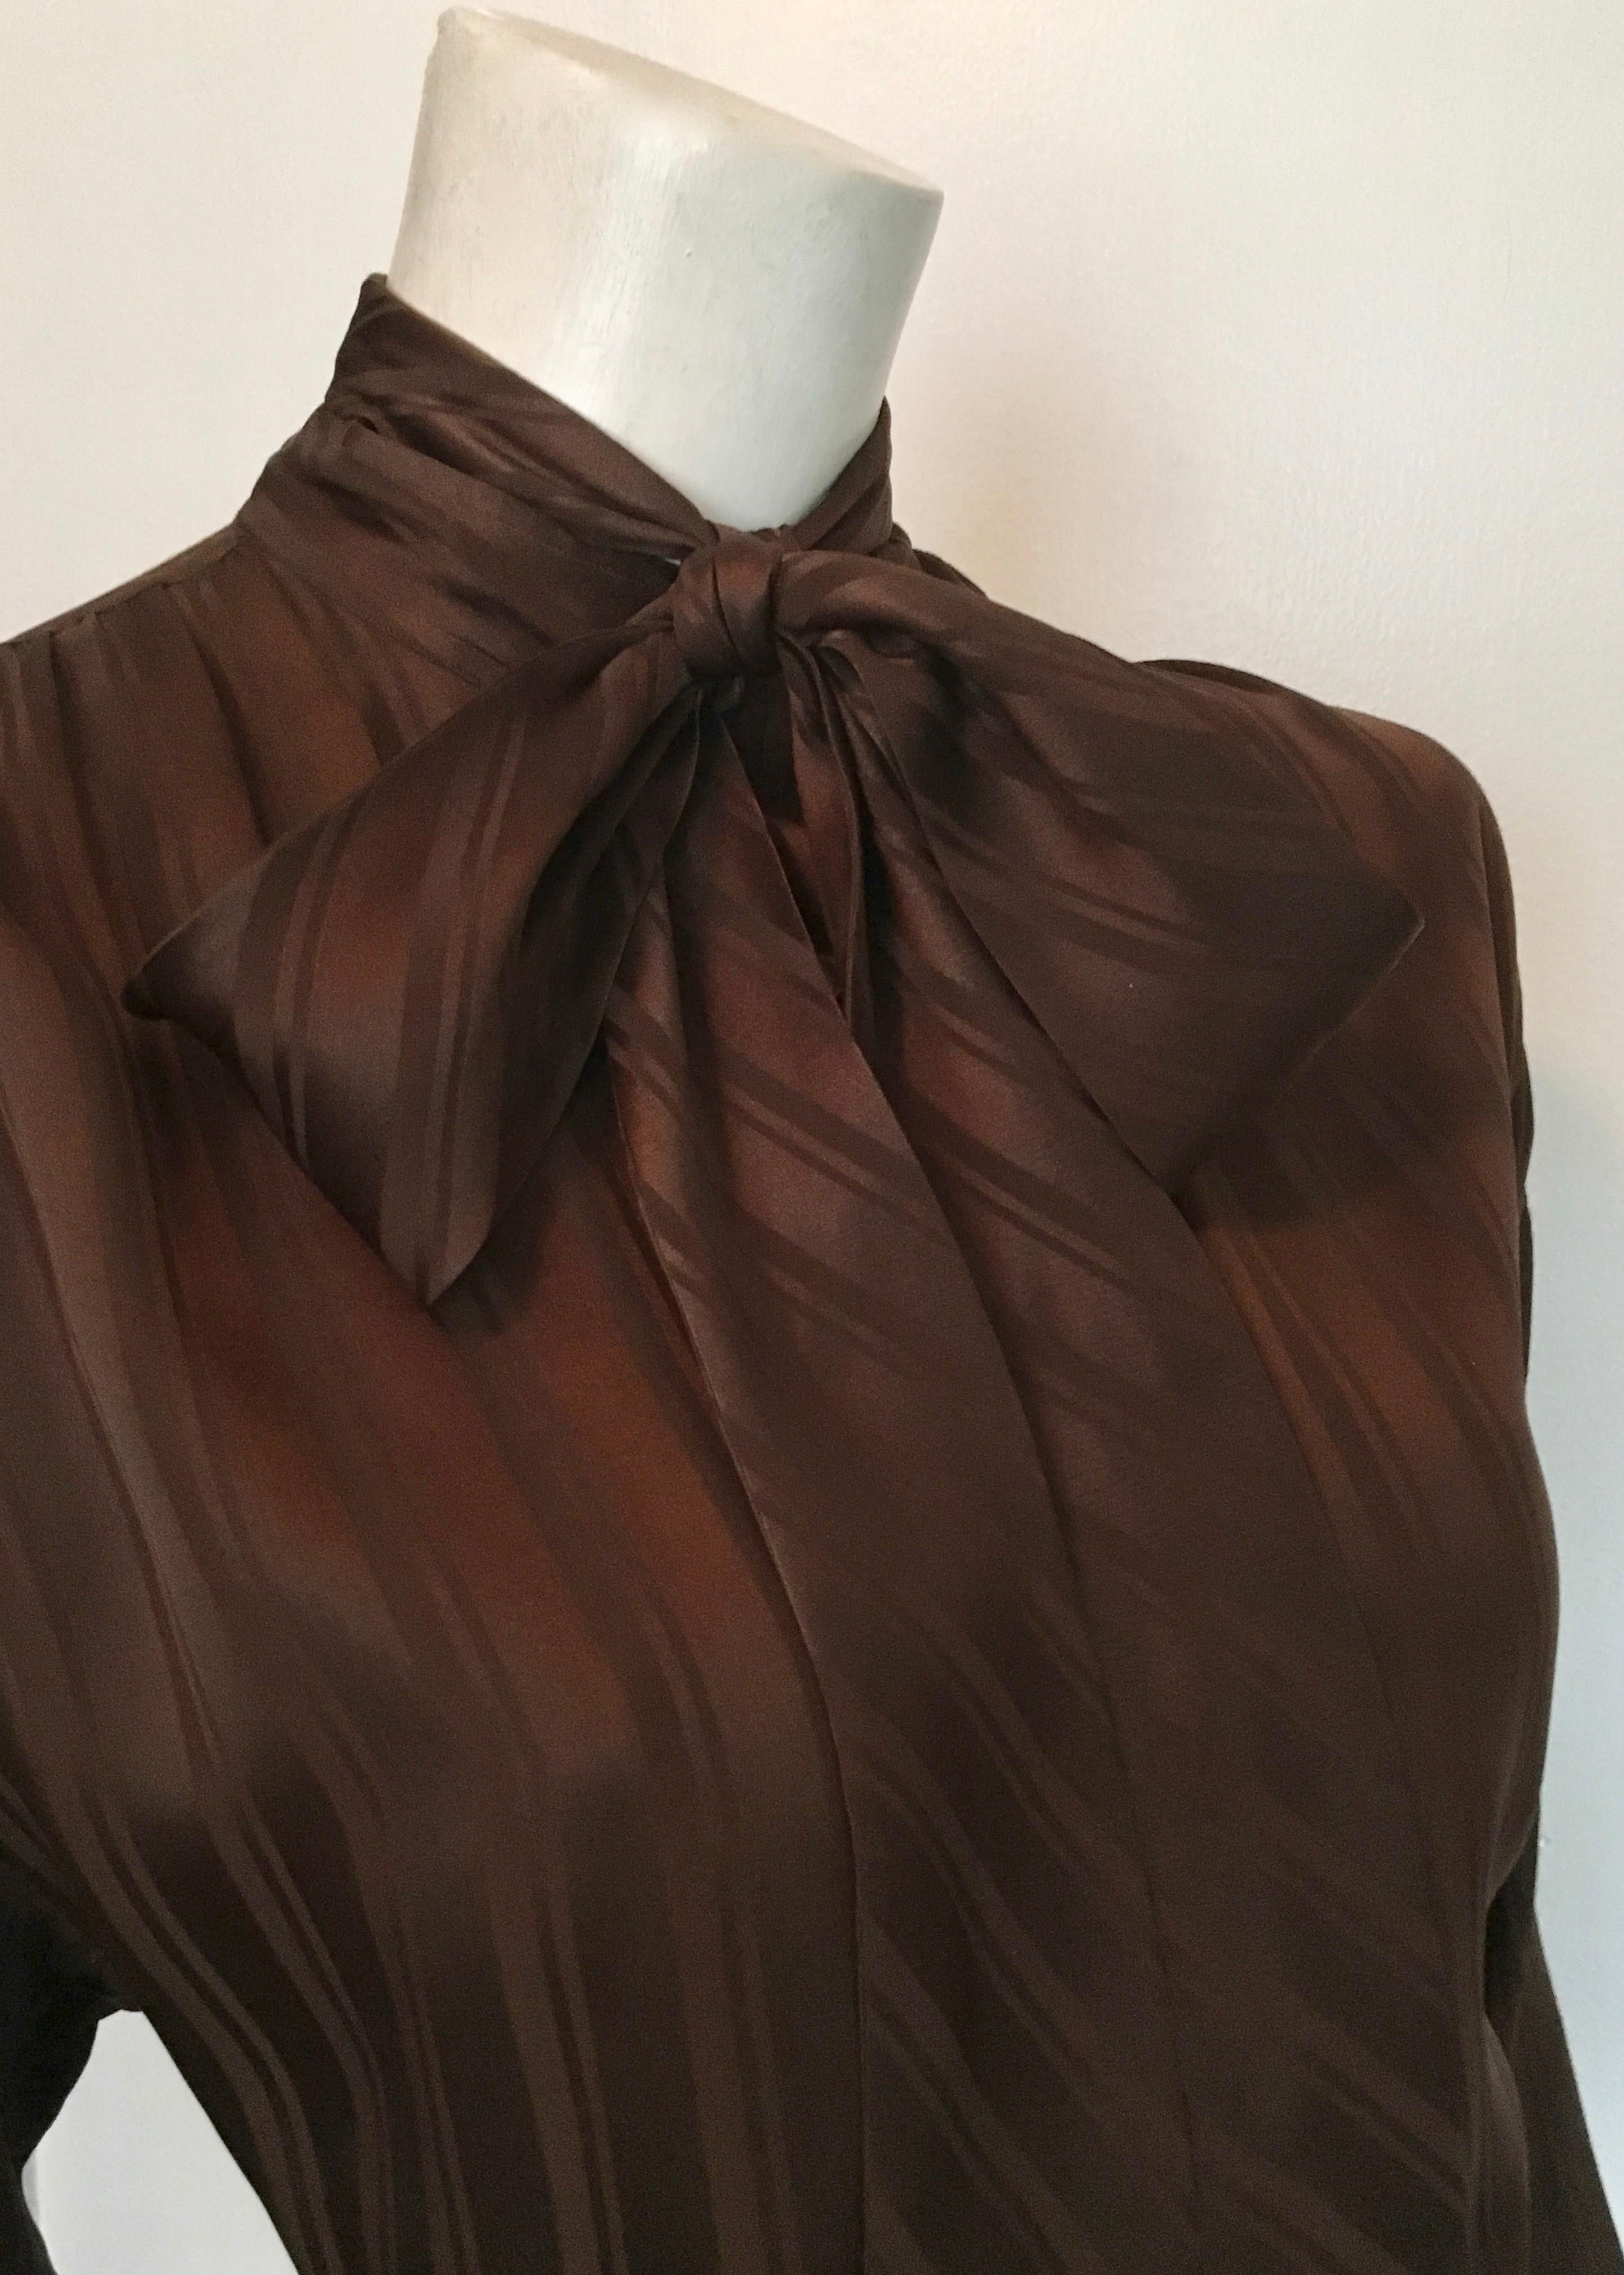 Women's or Men's Yves Saint Laurent Rive Gauche 1970s Brown Silk Blouse with Tie Size Large.  For Sale